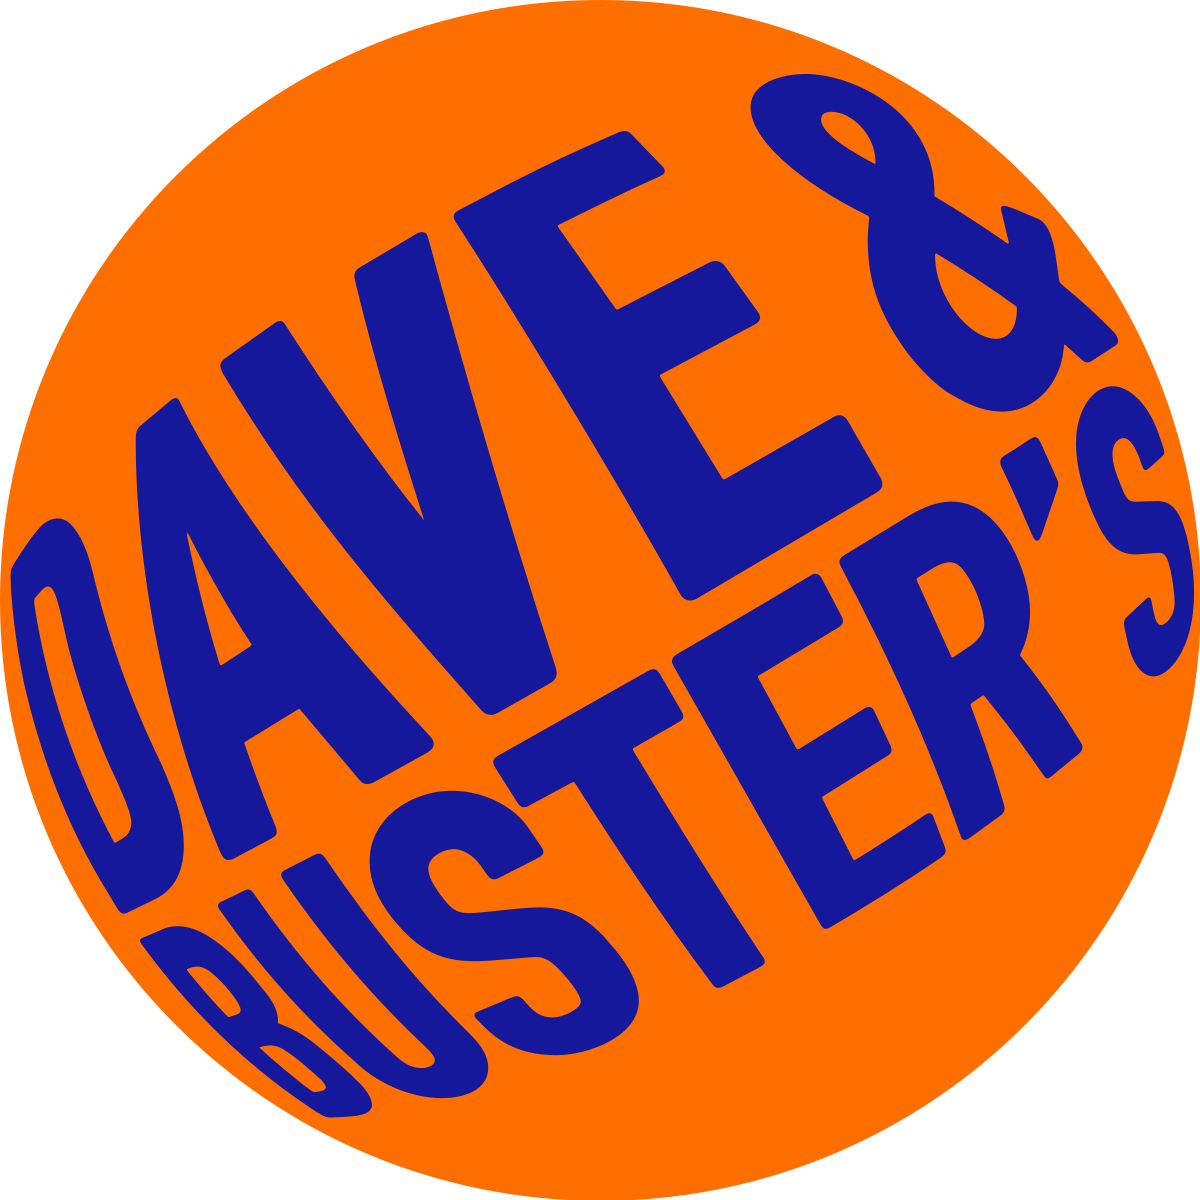 Dave & Buster's Brand Logo